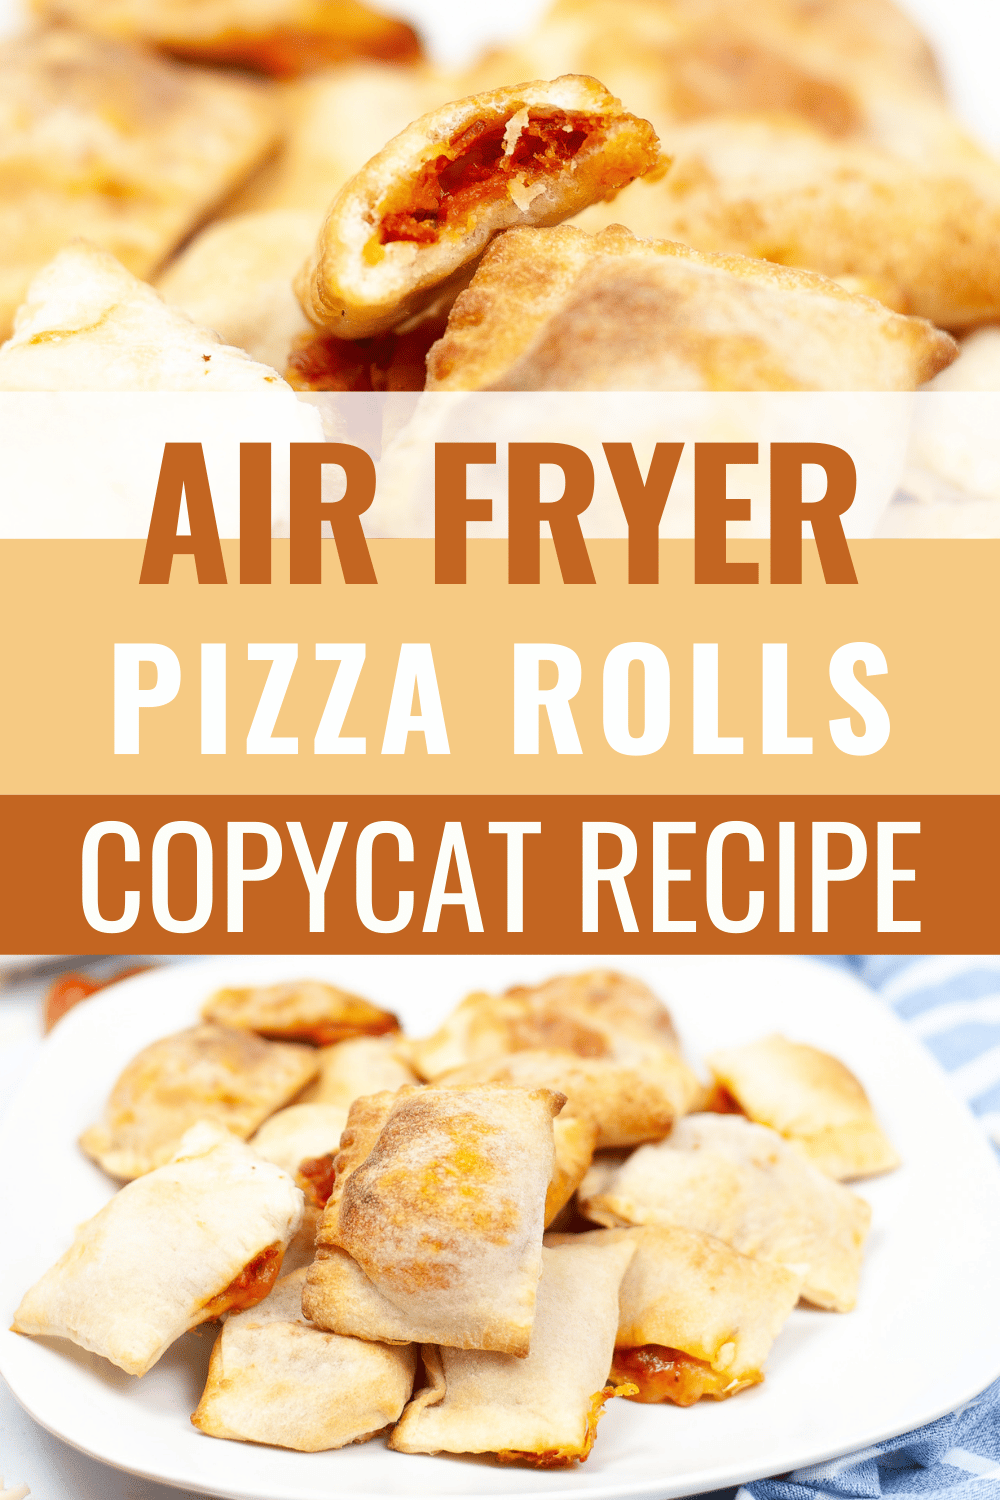 top image is a closeup of the inside of a pizza bite, bottom image is several pizza bites on a white plate with title text reading Air Fryer Pizza Rolls Copycat Recipe